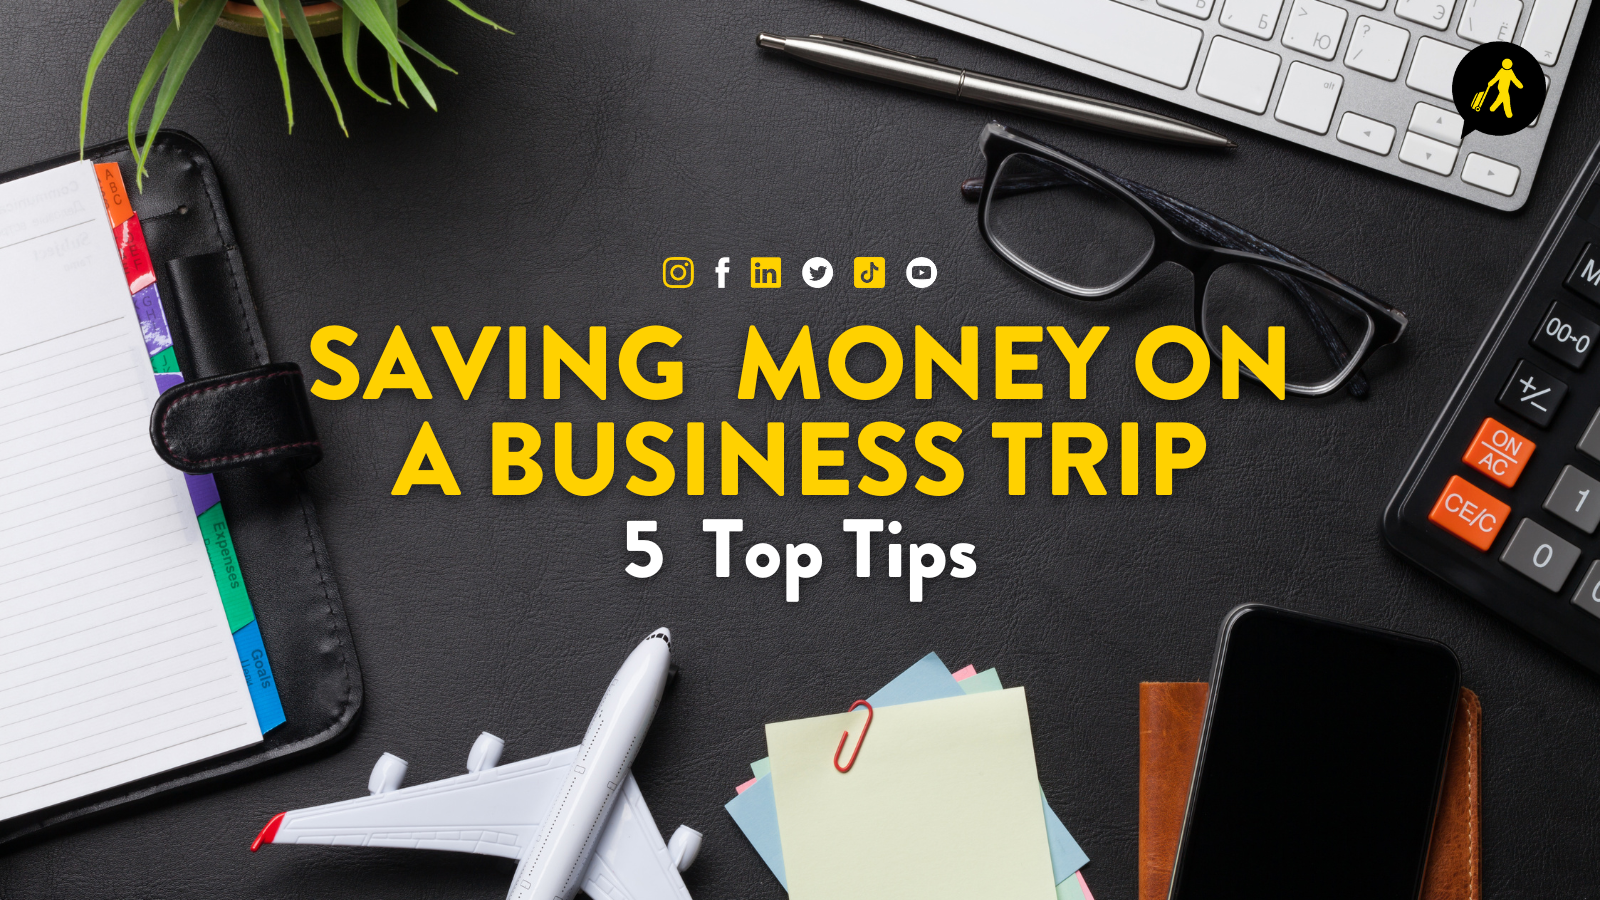 Saving money on a business trip: 5 top tips